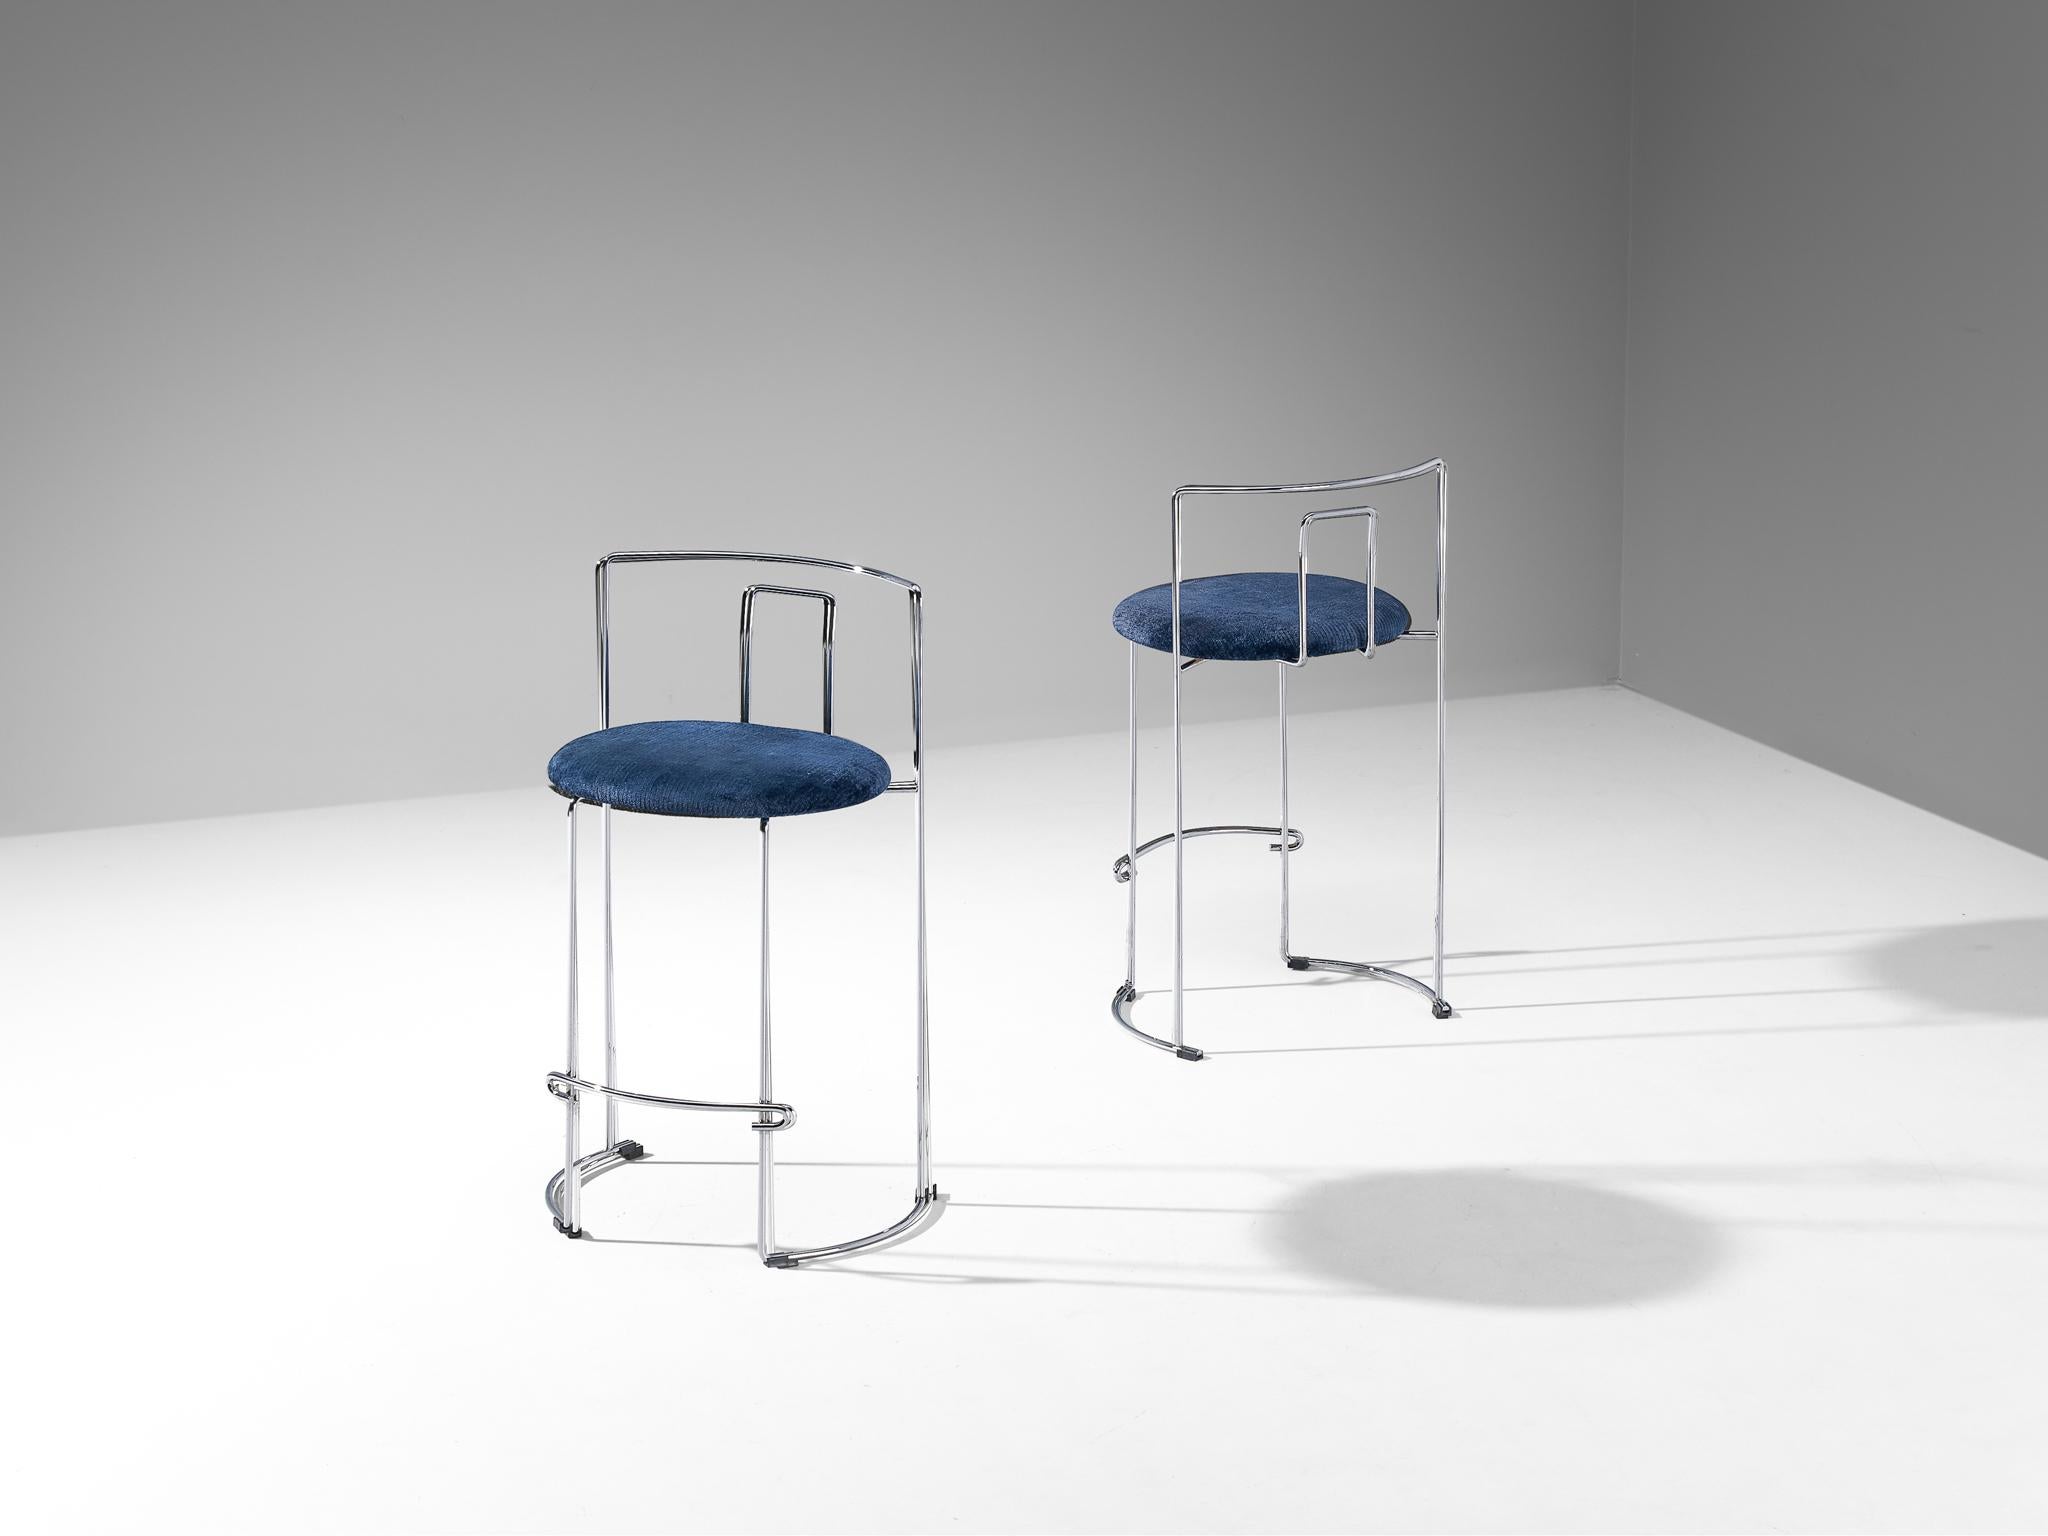 Kazuhide Takahama for Simon Gavina, pair 'Gaja' barstools, chrome-plated steel, fabric, Italy, design 1974

Pair of streamlined stools designed by Kazuhide Takahama in 1974. The frames of these chairs are elegant and subtle, due to the thin